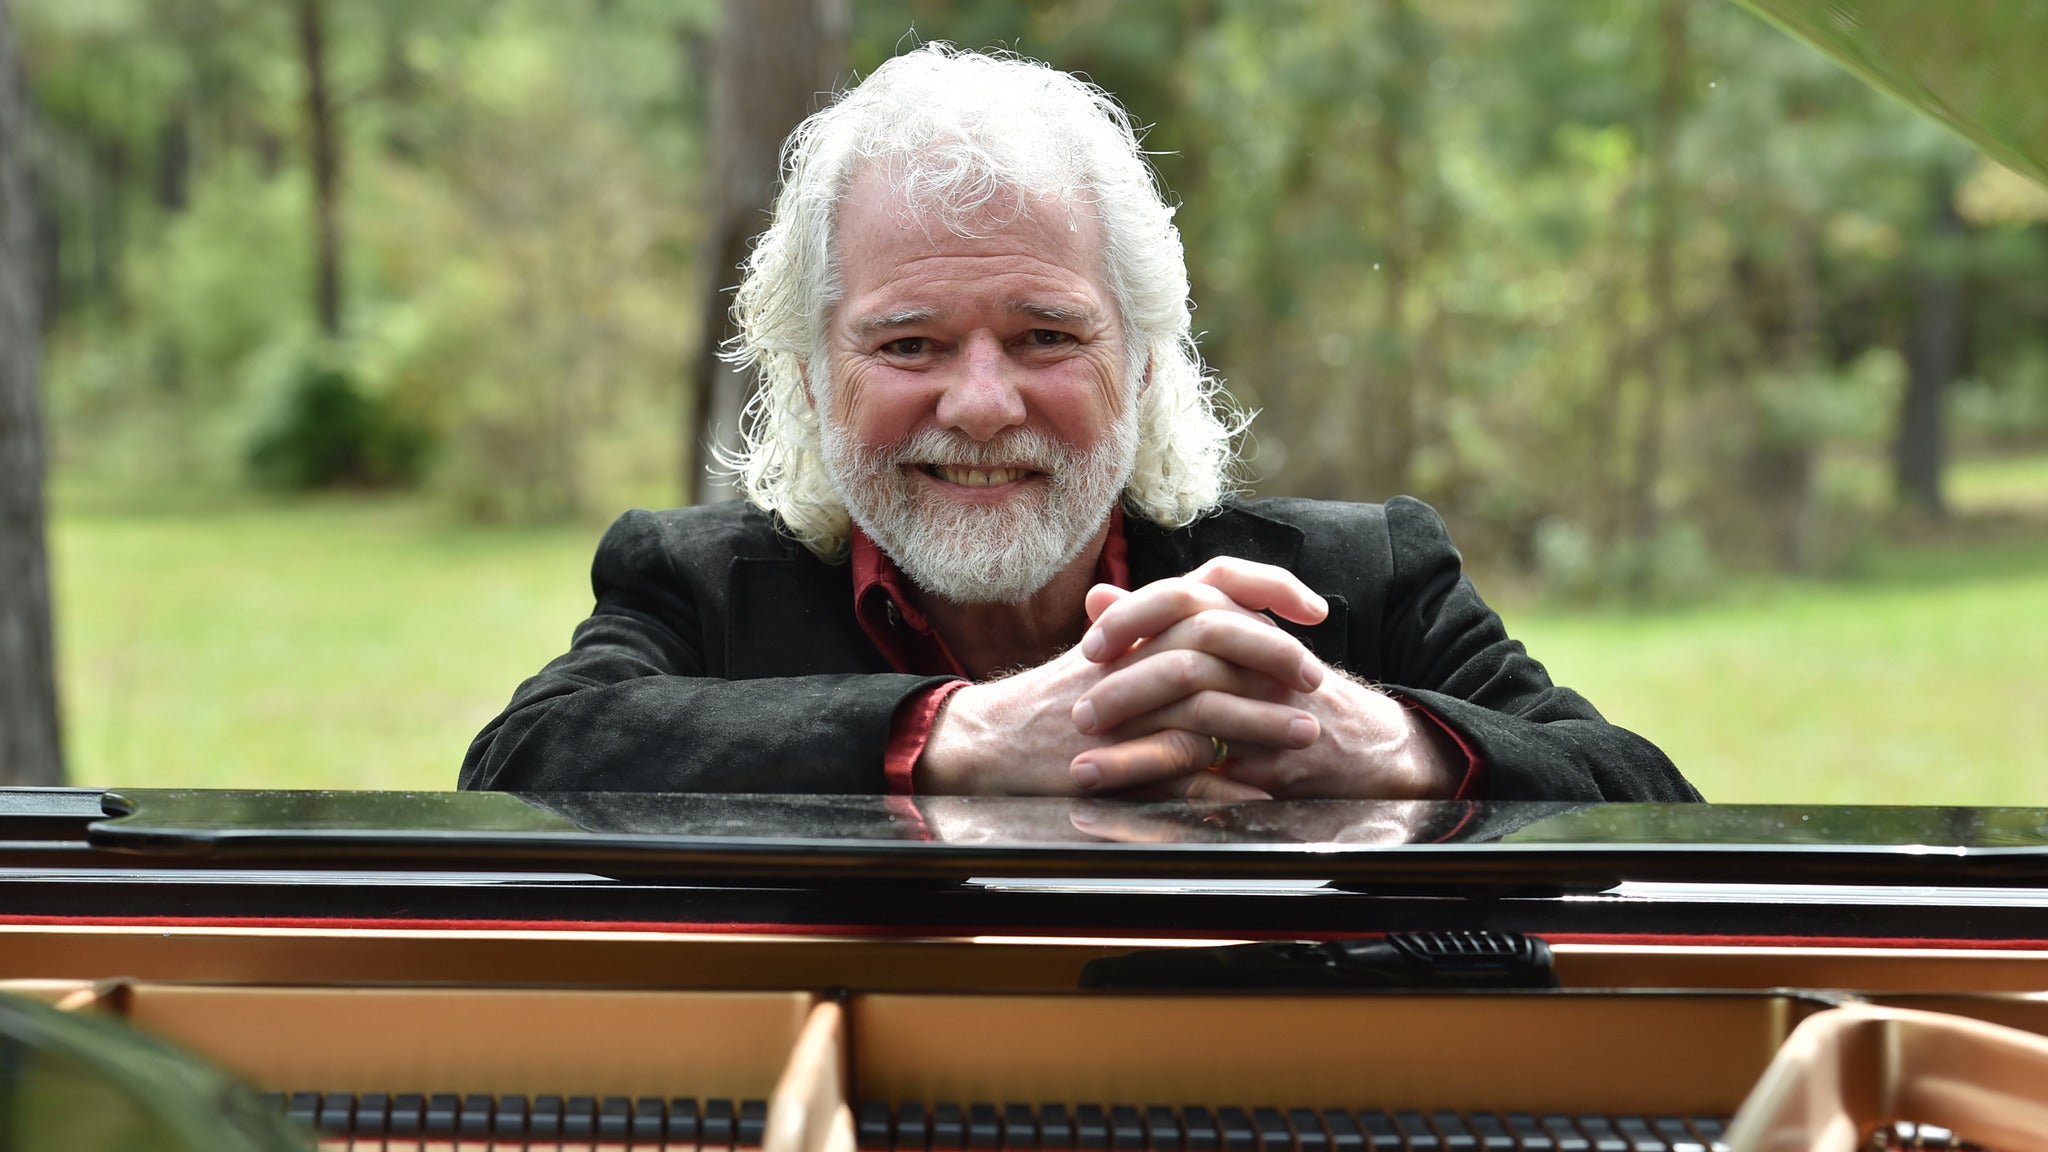 Chuck Leavell and his Big Band in New York promo photo for Live Nation presale offer code